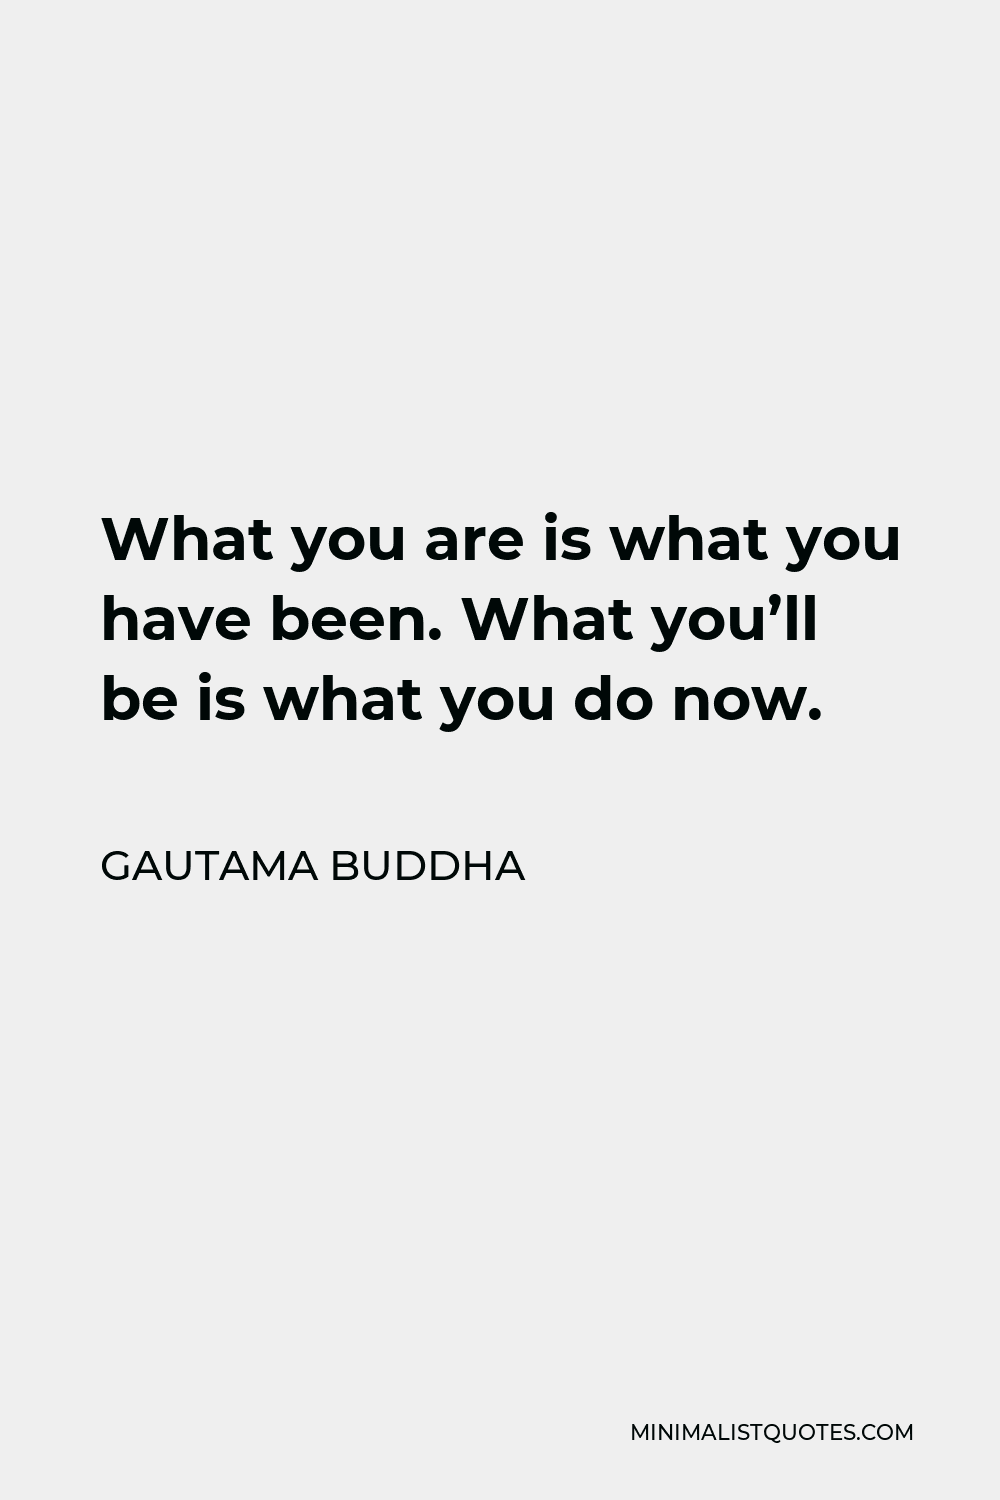 Gautama Buddha Quote - What you are is what you have been. What you’ll be is what you do now.